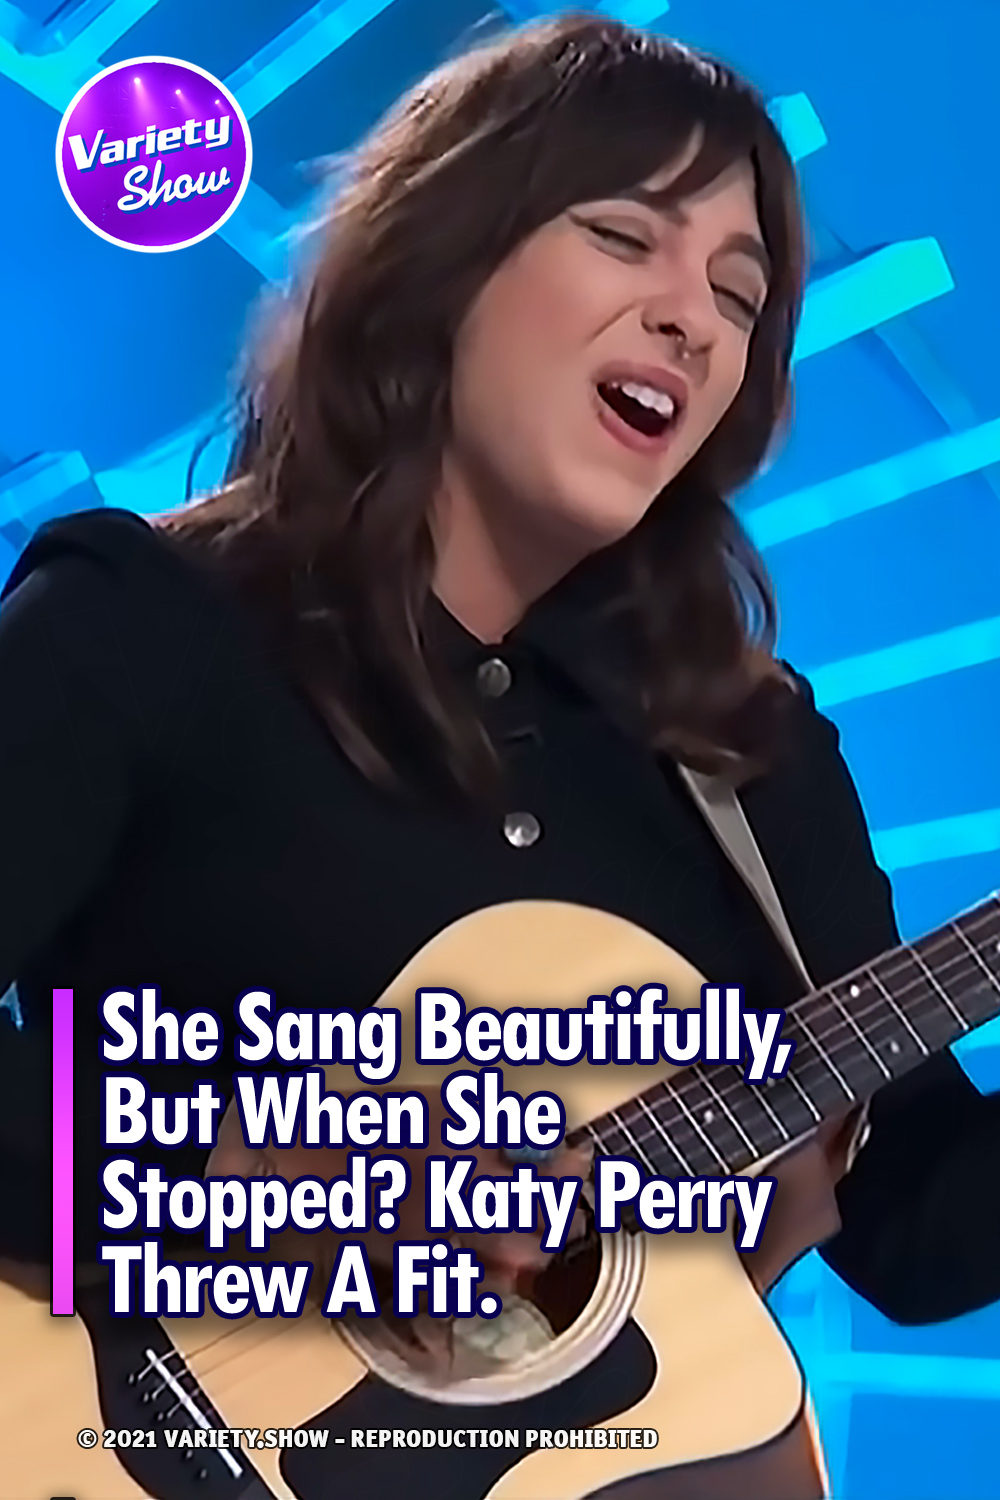 She Sang Beautifully, But When She Stopped? Katy Perry Threw A Fit.